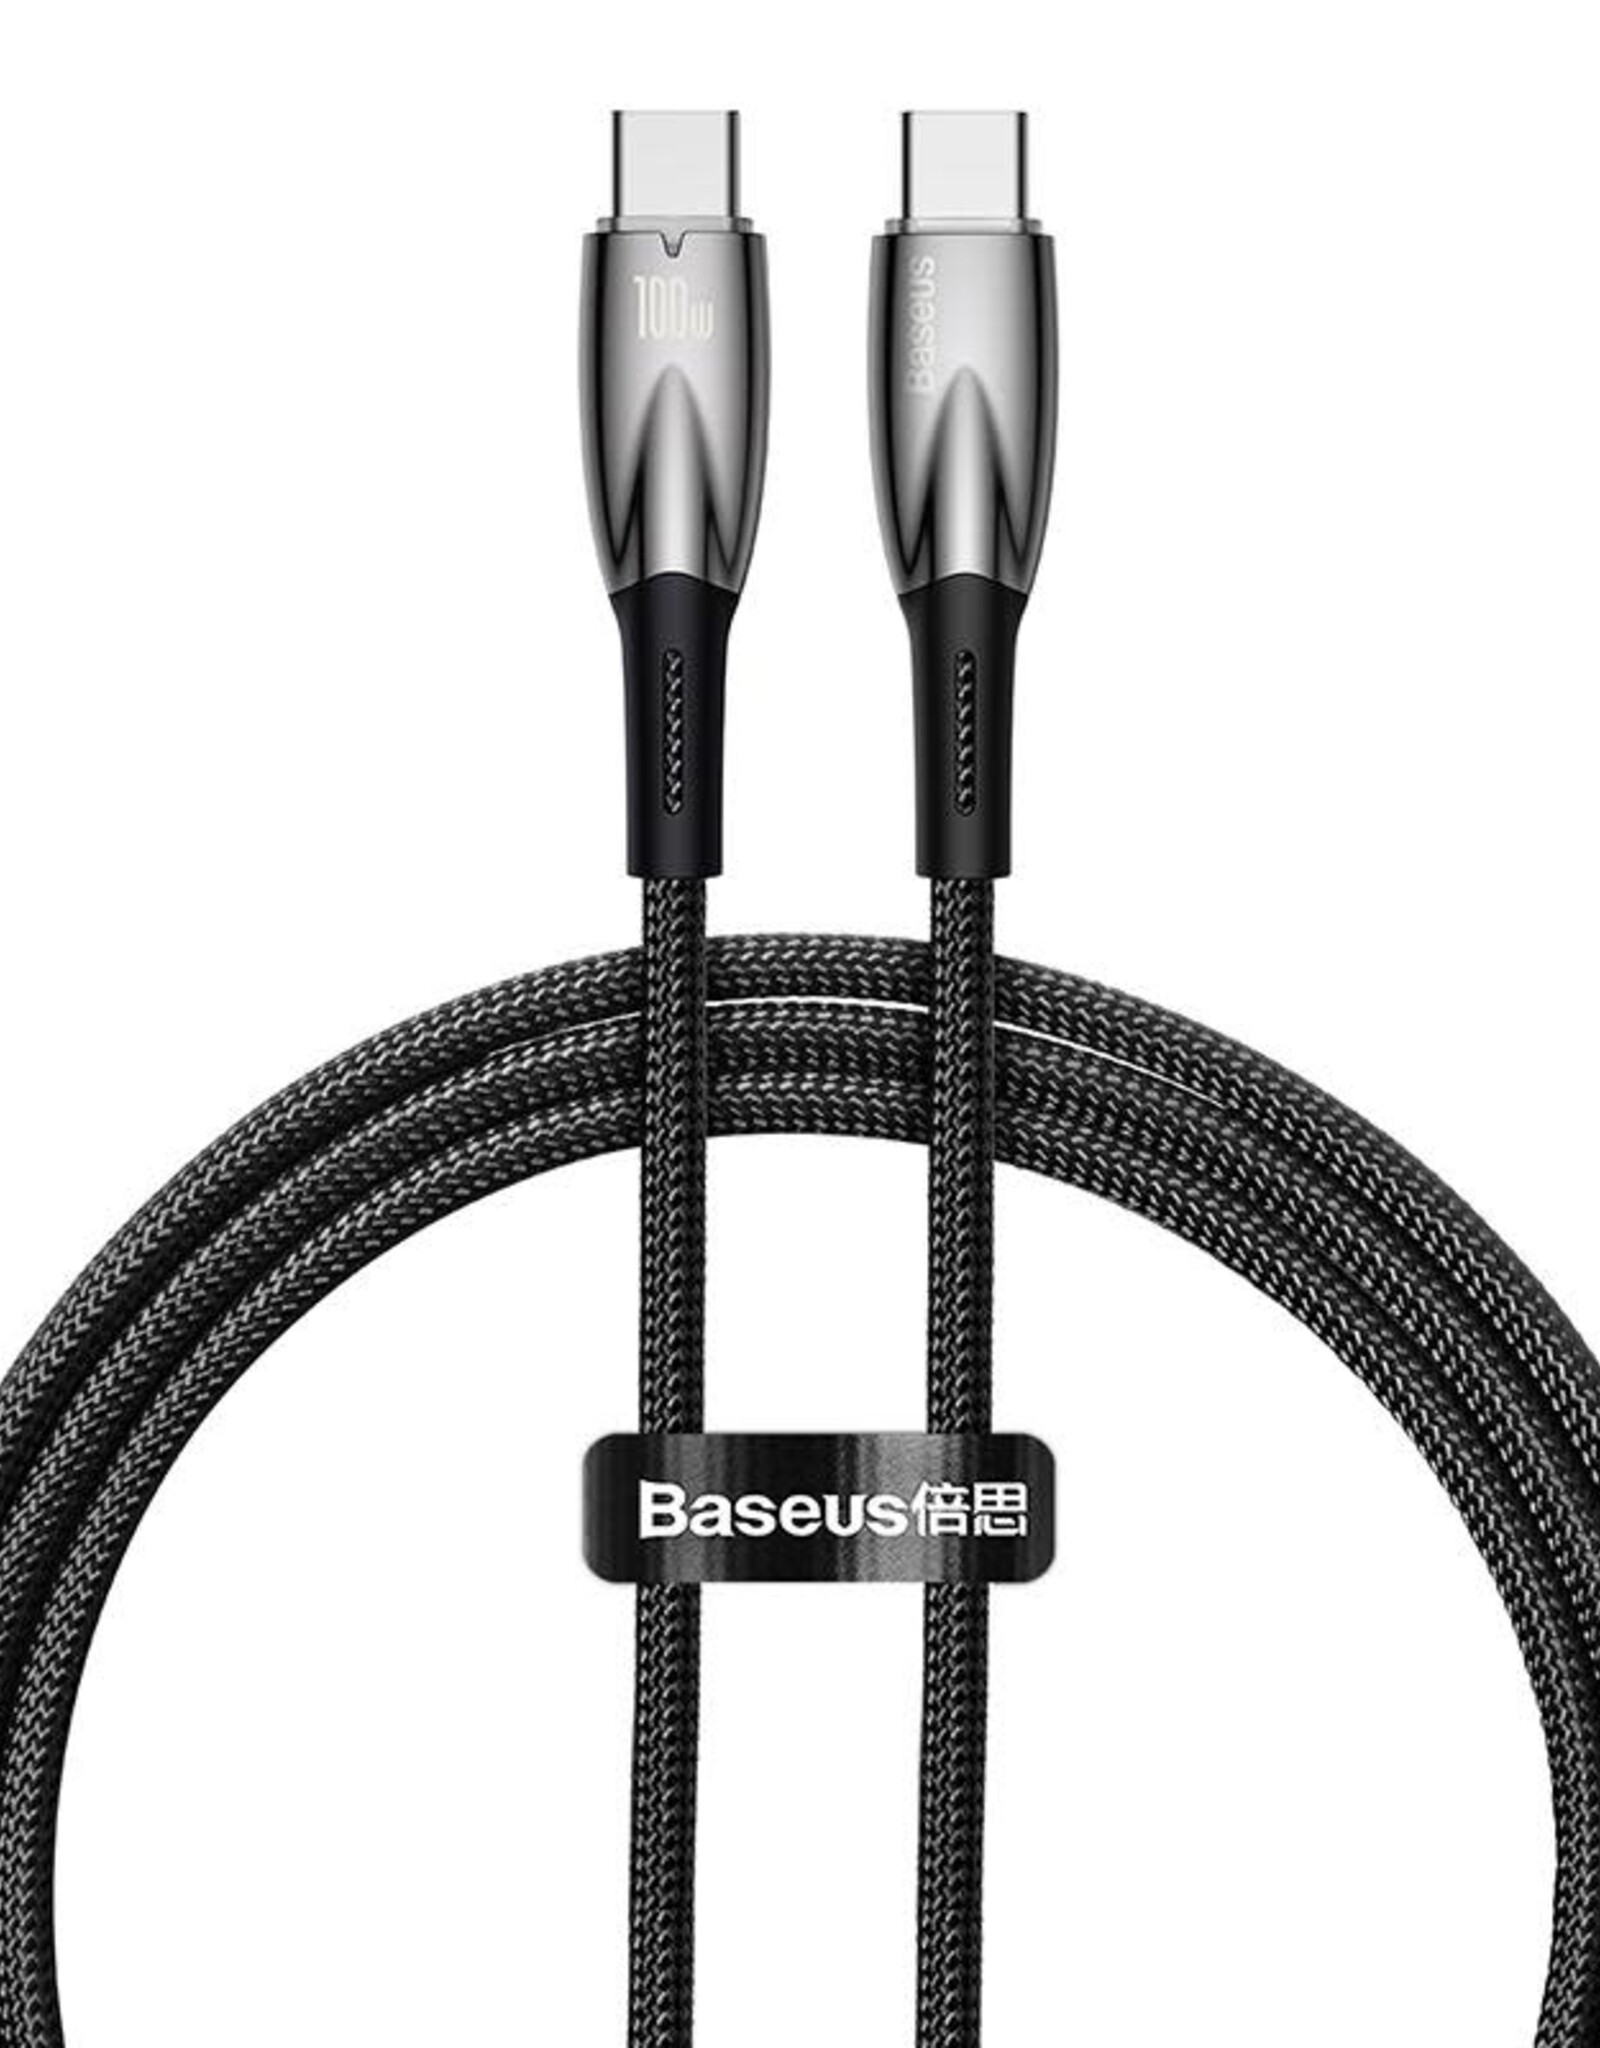 Baseus 100w Glimmer Charging Data Cable type c to type c 1m black